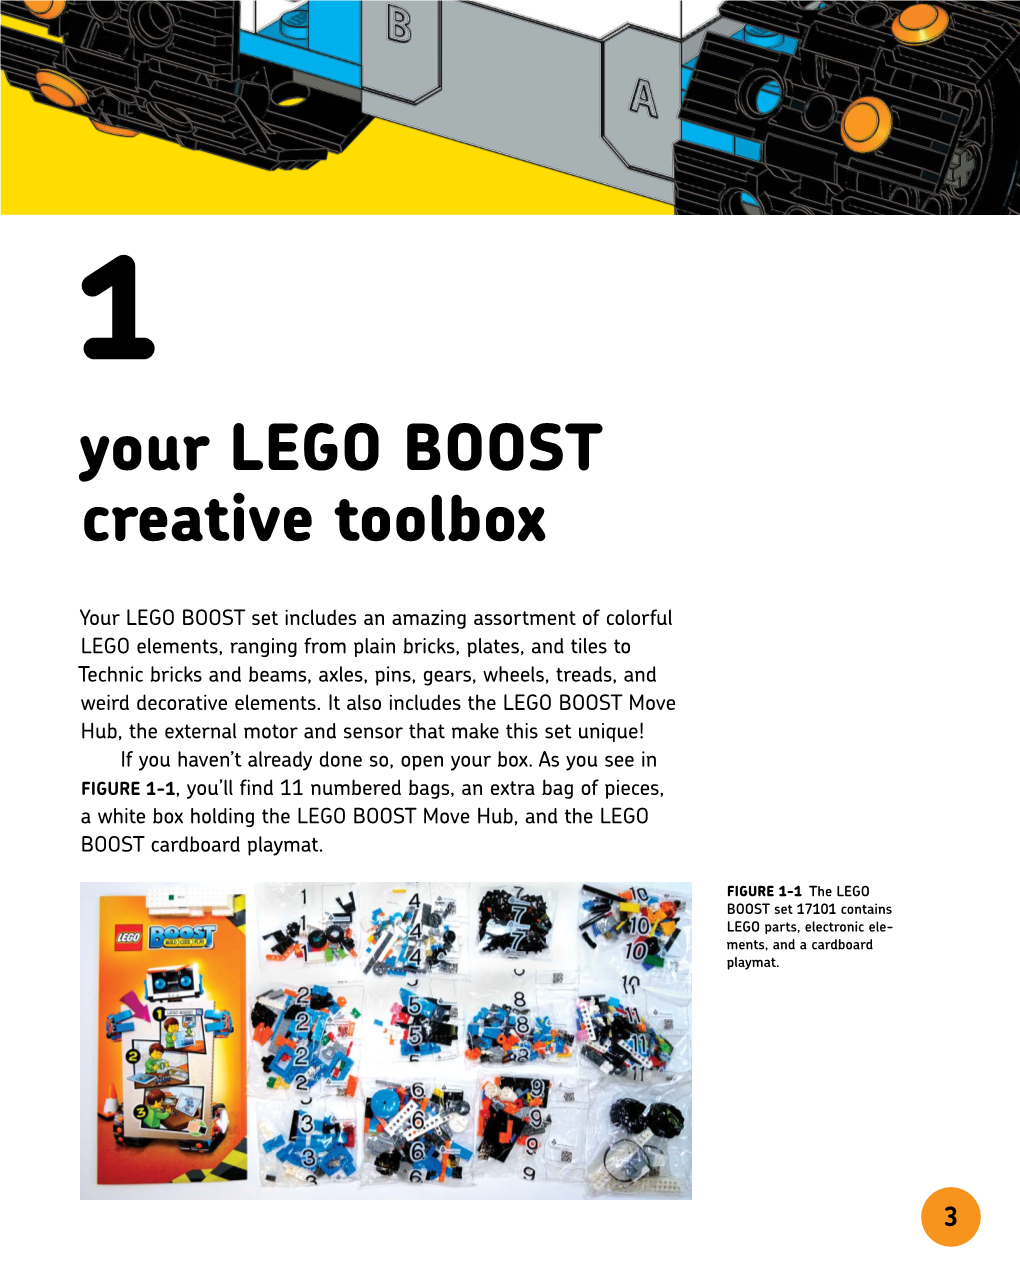 Your LEGO BOOST Creative Toolbox